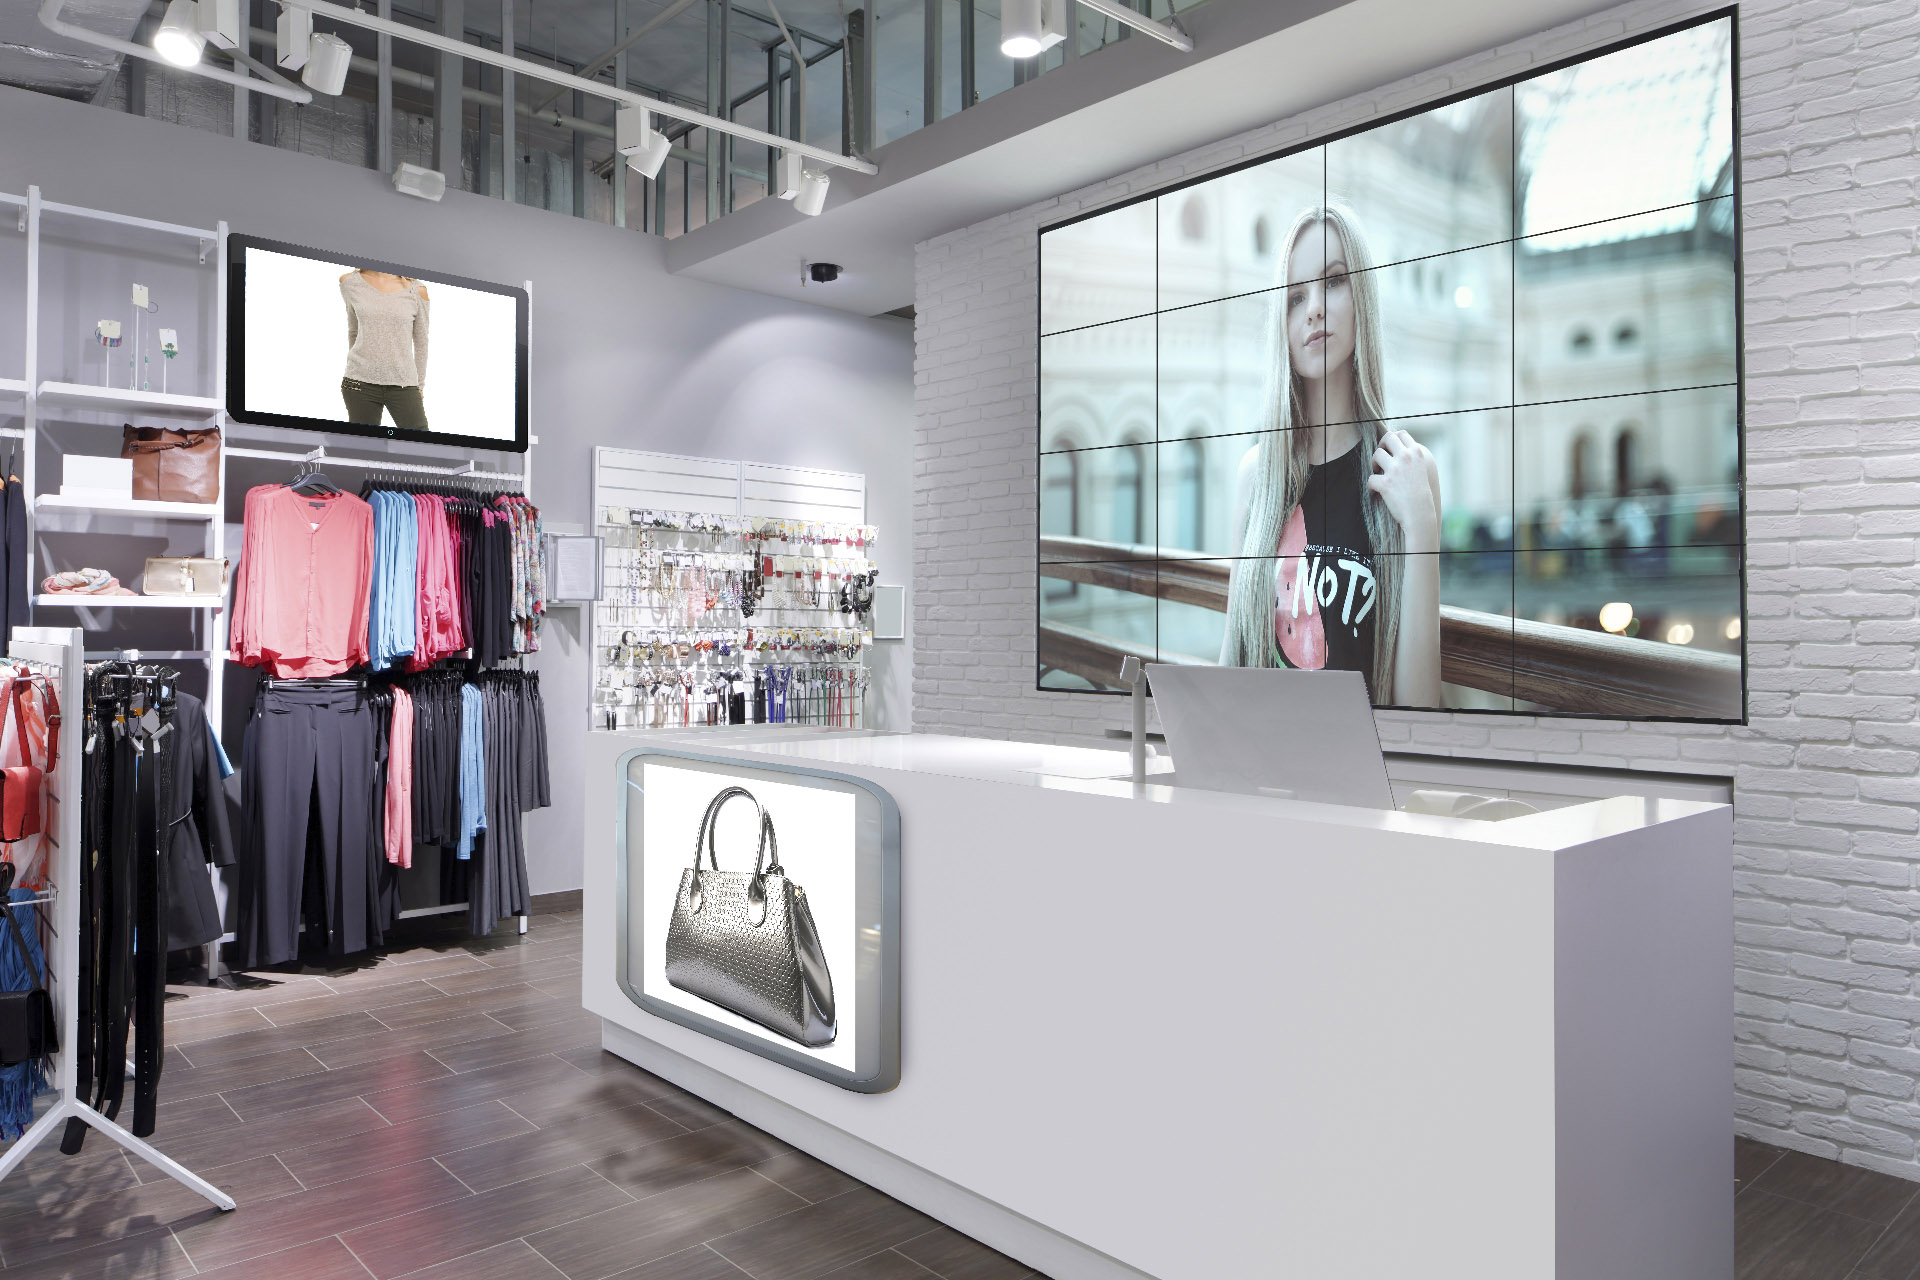 Multi-screen spliced video wall for retail stores